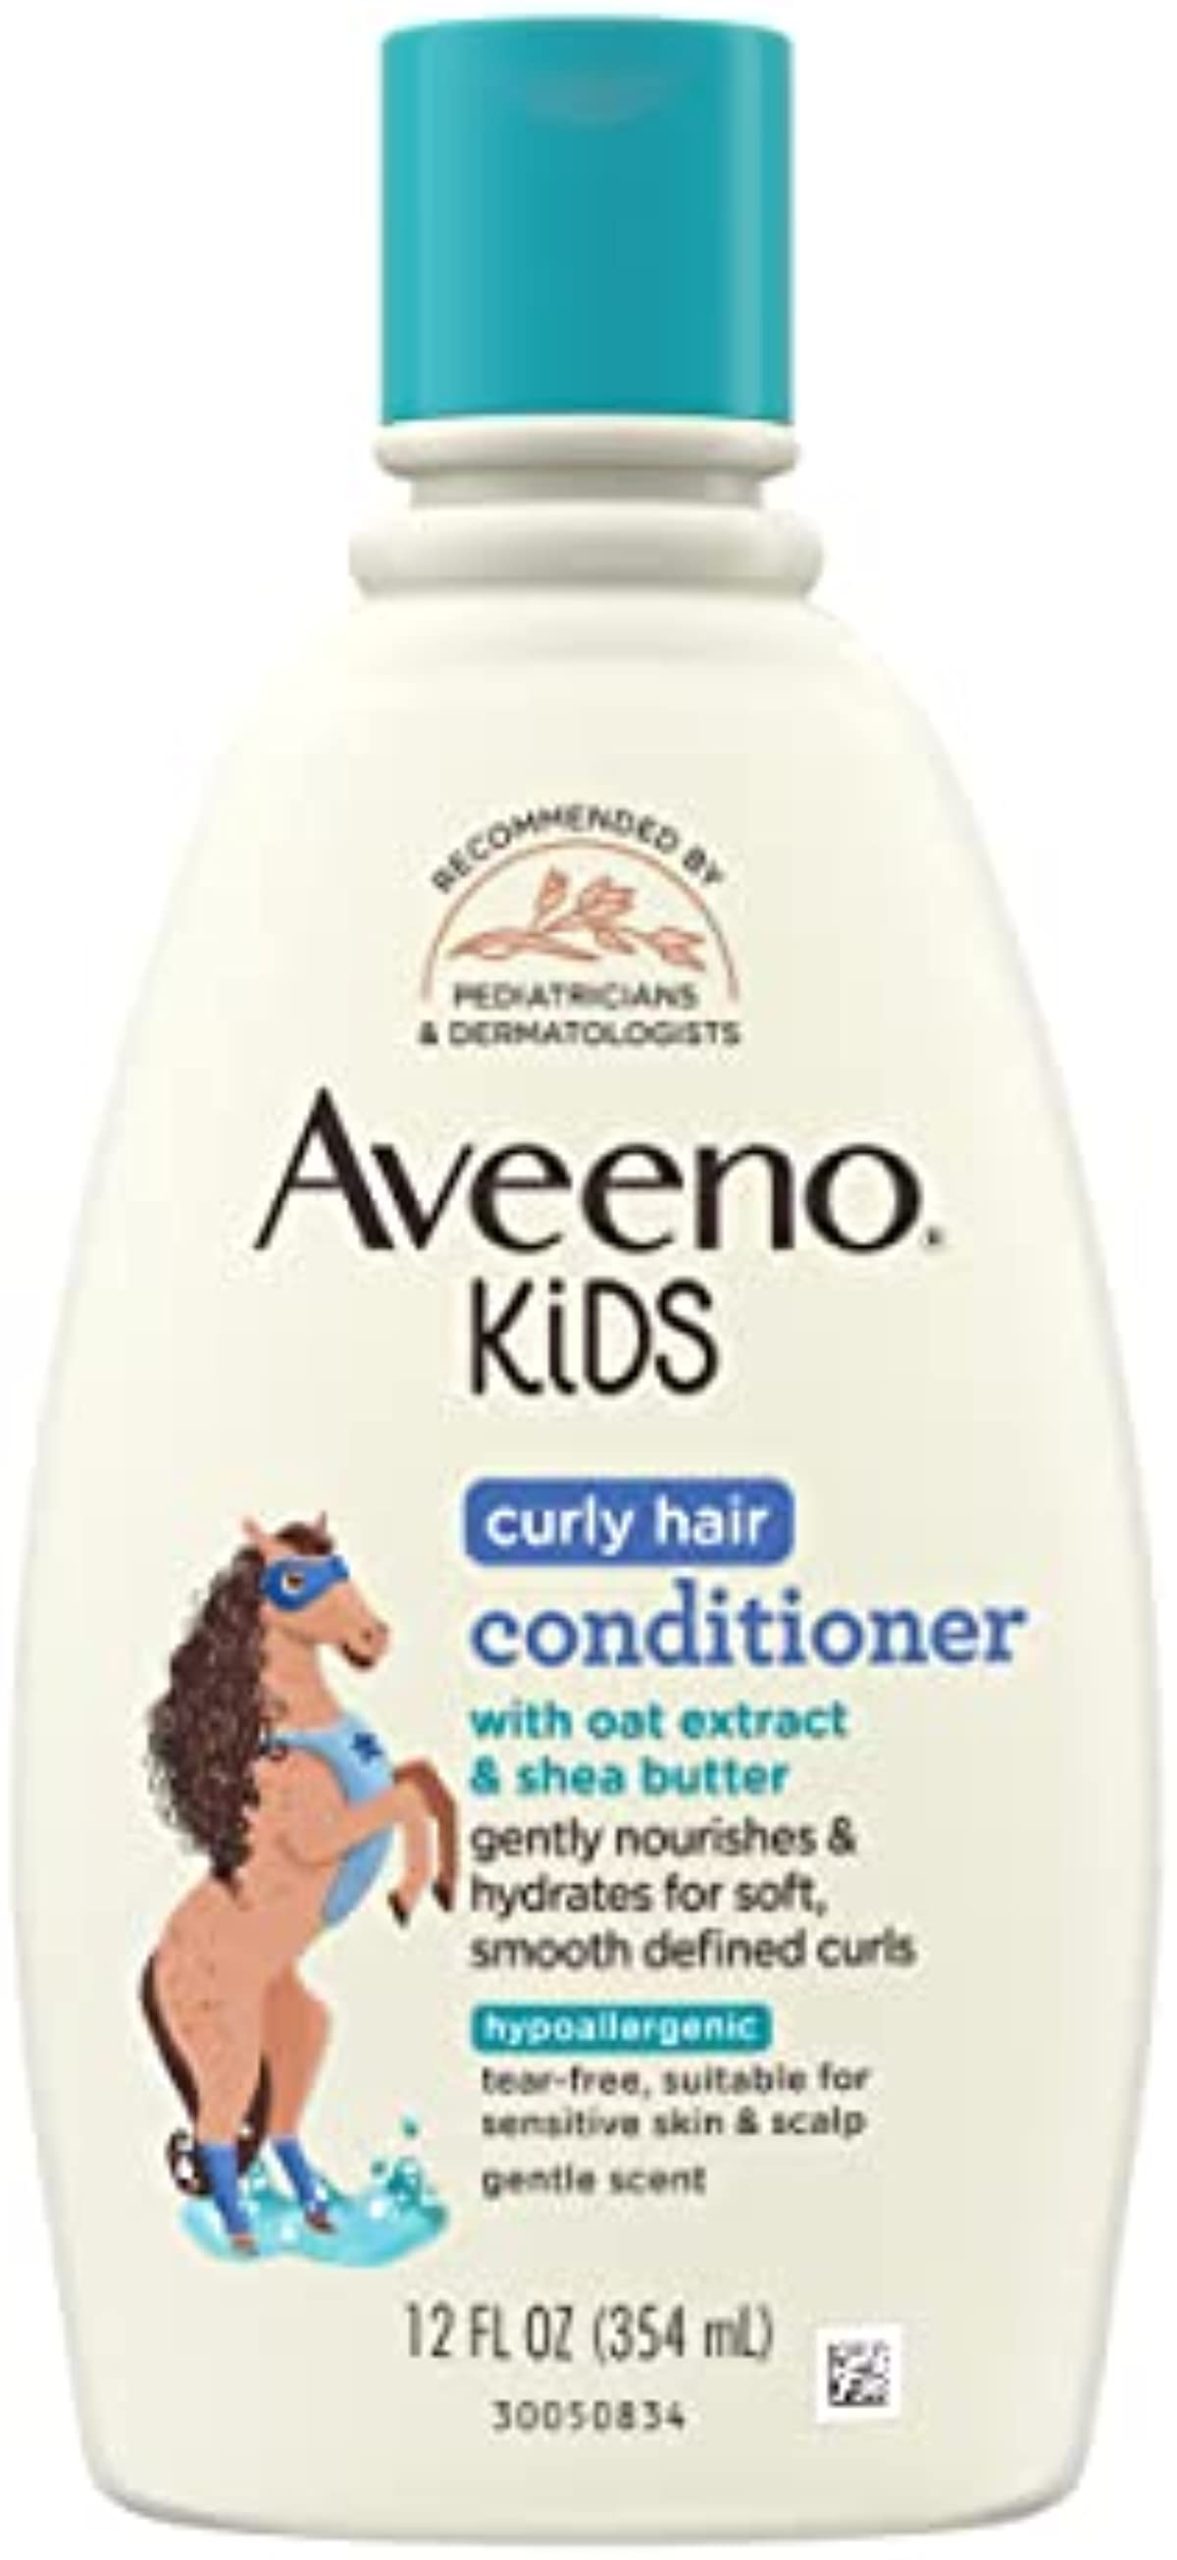 Aveeno Kids Curly Hair Conditioner with Oat Extract & Shea Butter, Gently Nourishes & Hydrates for Defined Curls, Tear-Free & Suitable for Sensitive Skin, Hypoallergenic, 12 fl. Oz